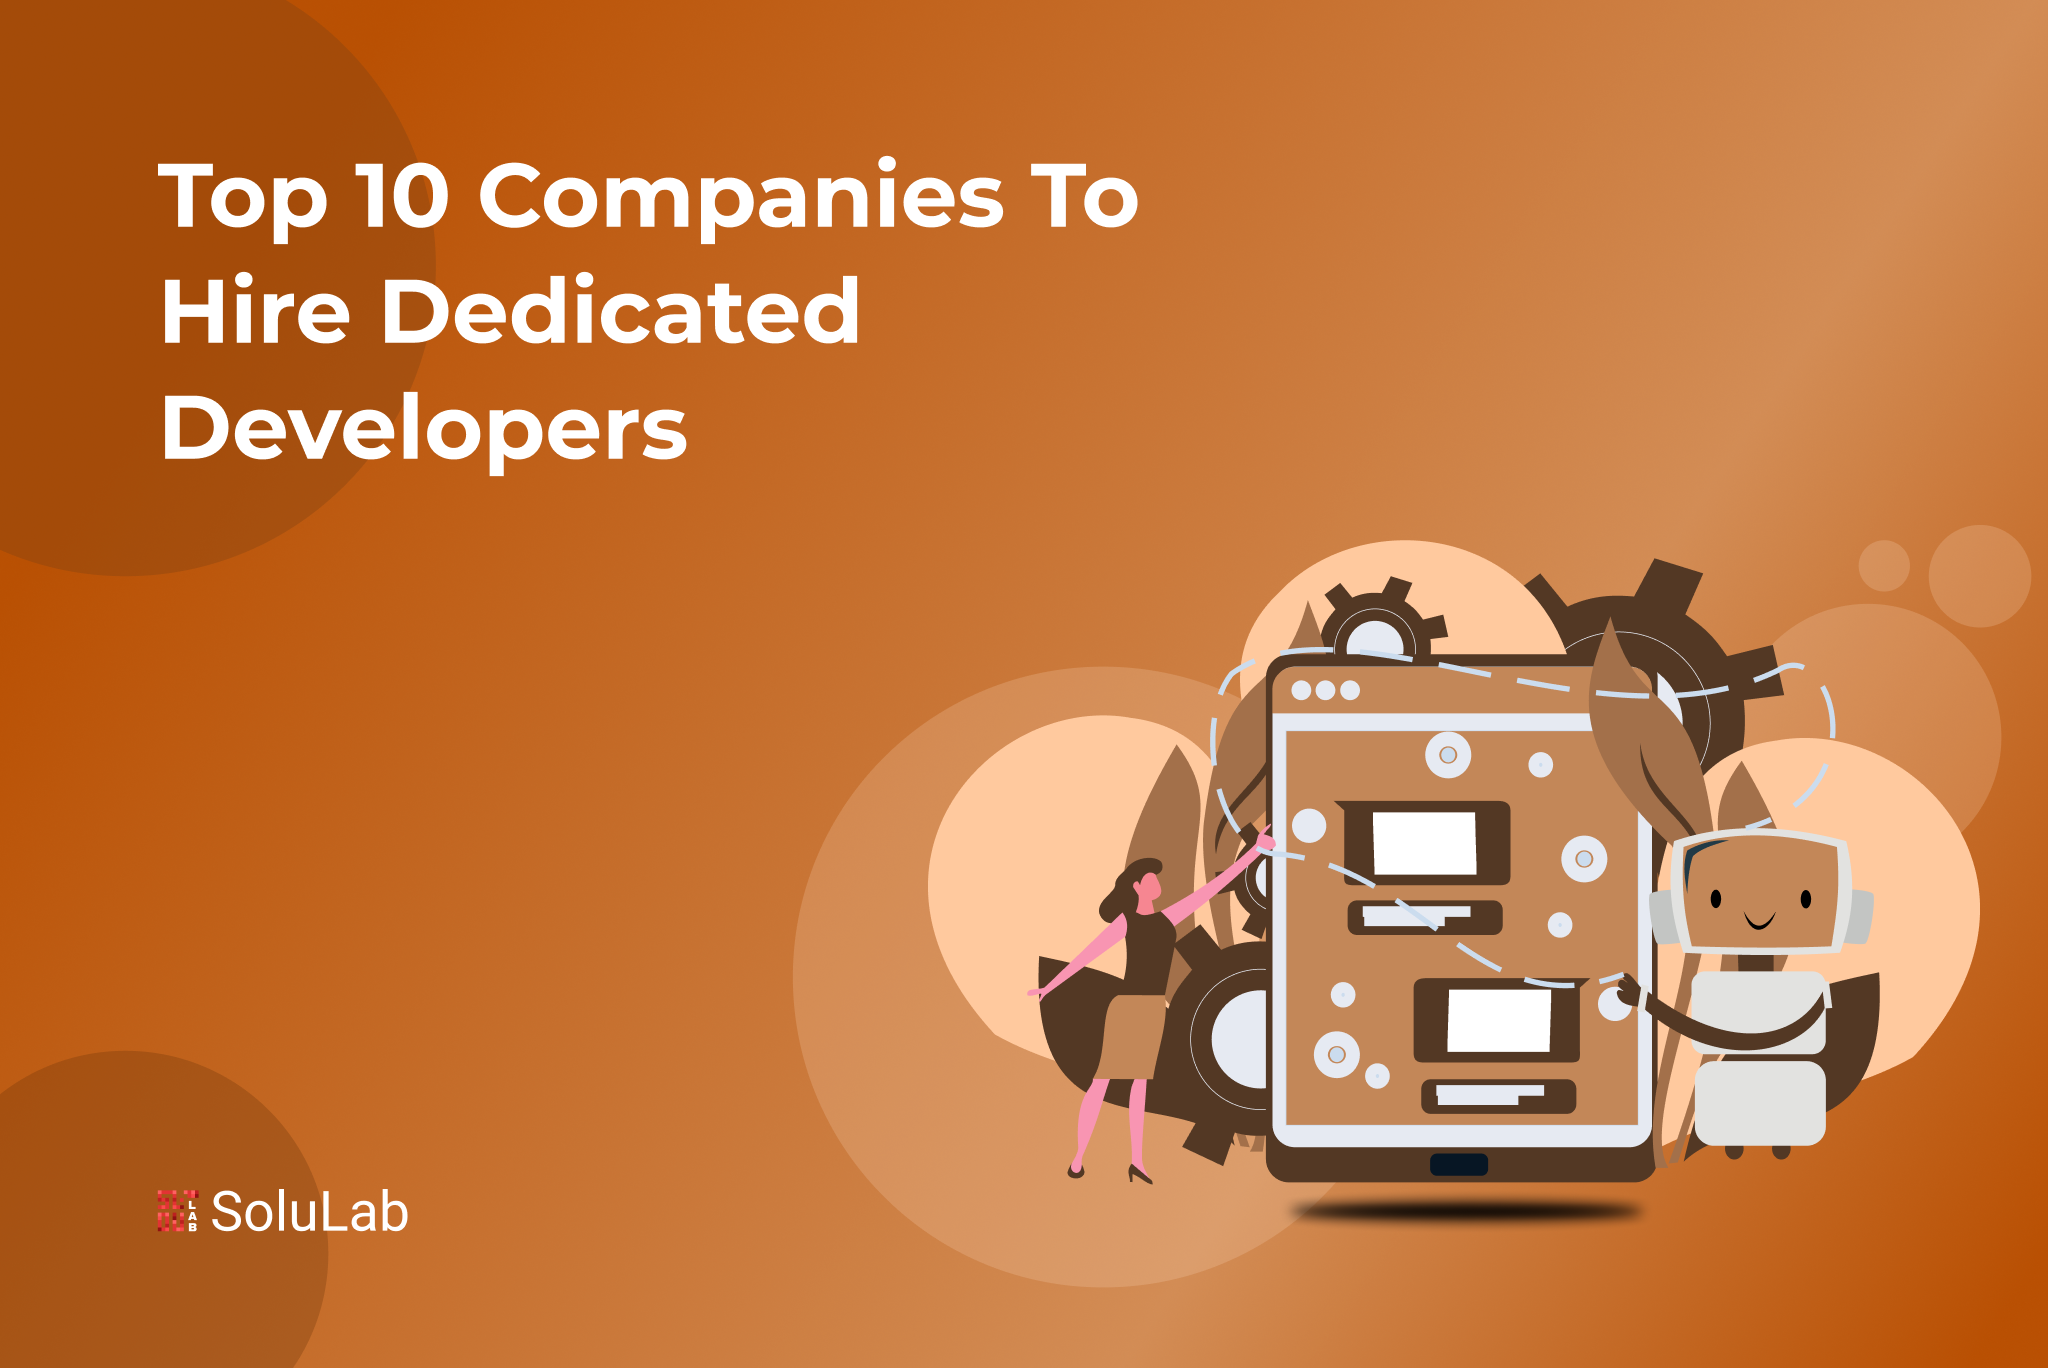 Top 10 Companies to Hire Dedicated Developers